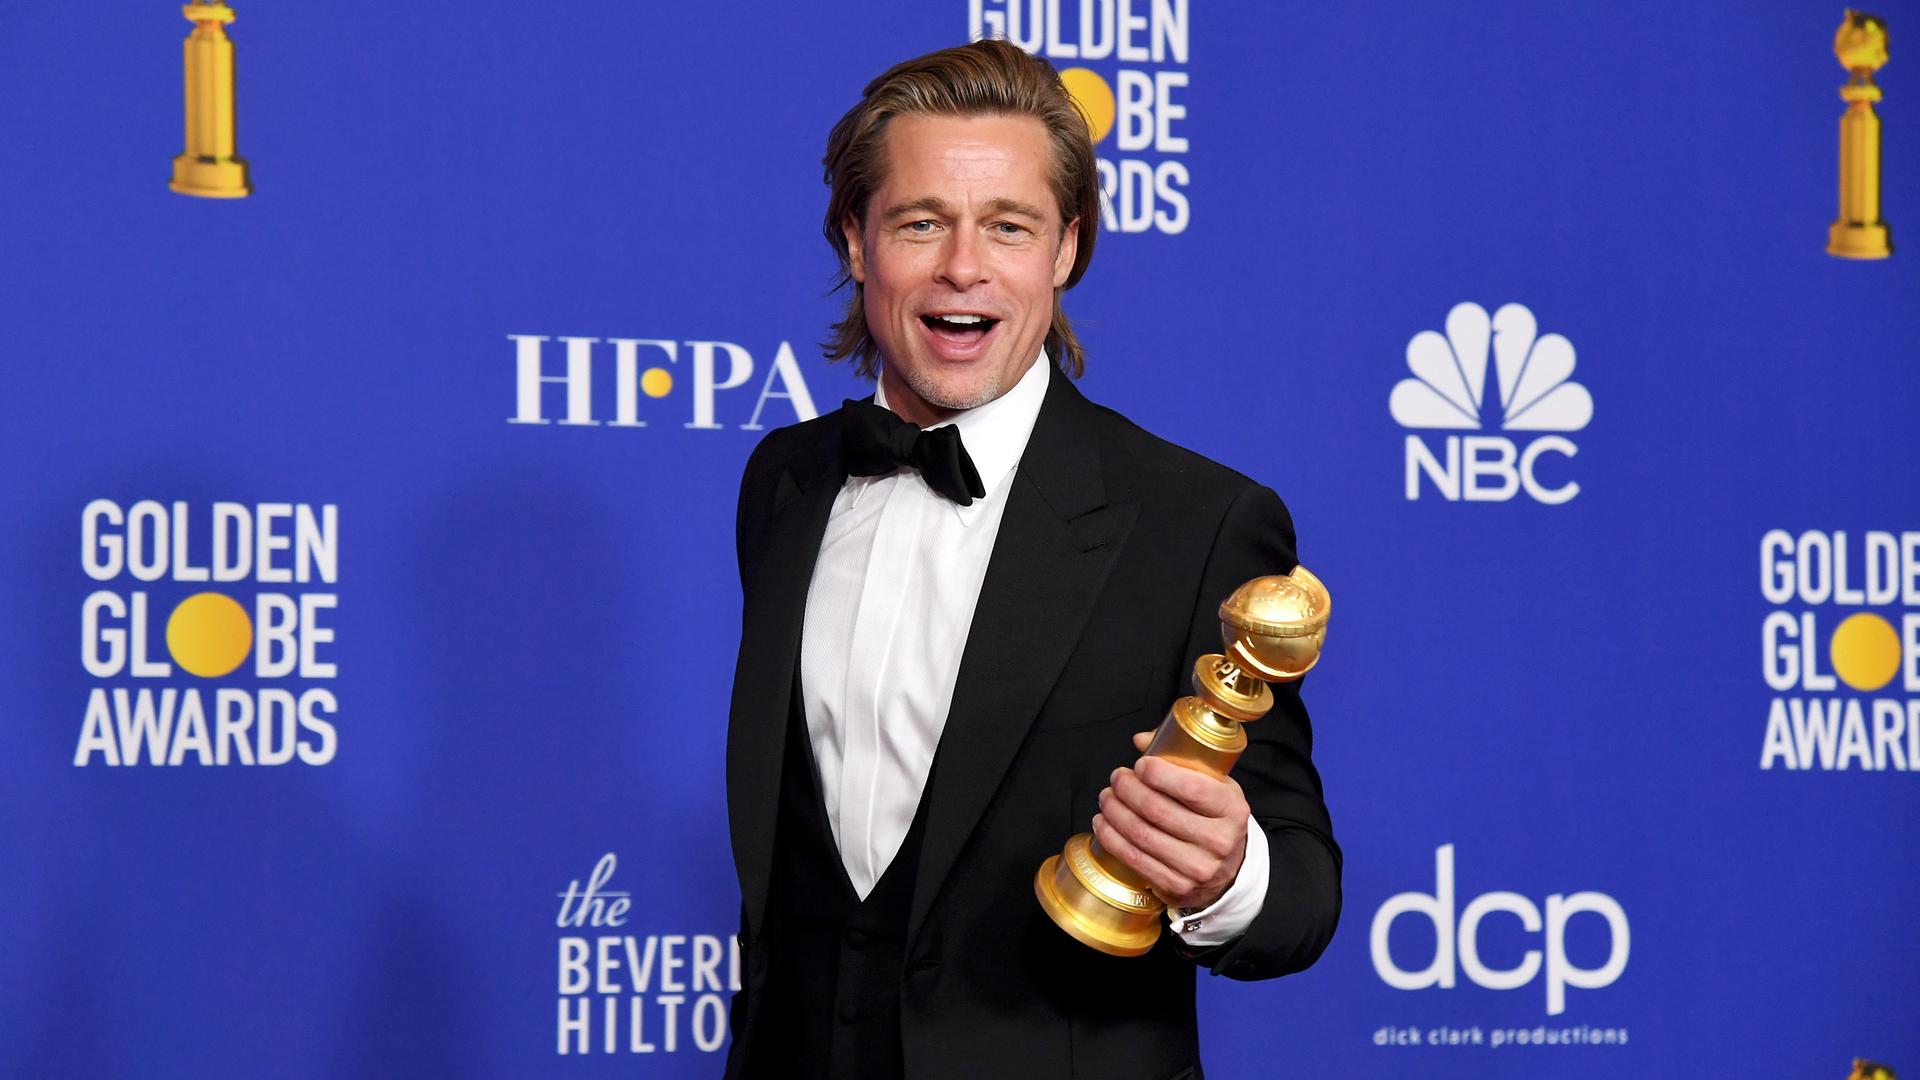 BEVERLY HILLS, CALIFORNIA - JANUARY 05: Brad Pitt, winner of Best Performance by a Supporting Actor in a Motion Picture, poses in the press room during the 77th Annual Golden Globe Awards at The Beverly Hilton Hotel on January 05, 2020 in Beverly Hills, California.   Kevin Winter/Getty Images/AFP
== FOR NEWSPAPERS, INTERNET, TELCOS & TELEVISION USE ONLY ==